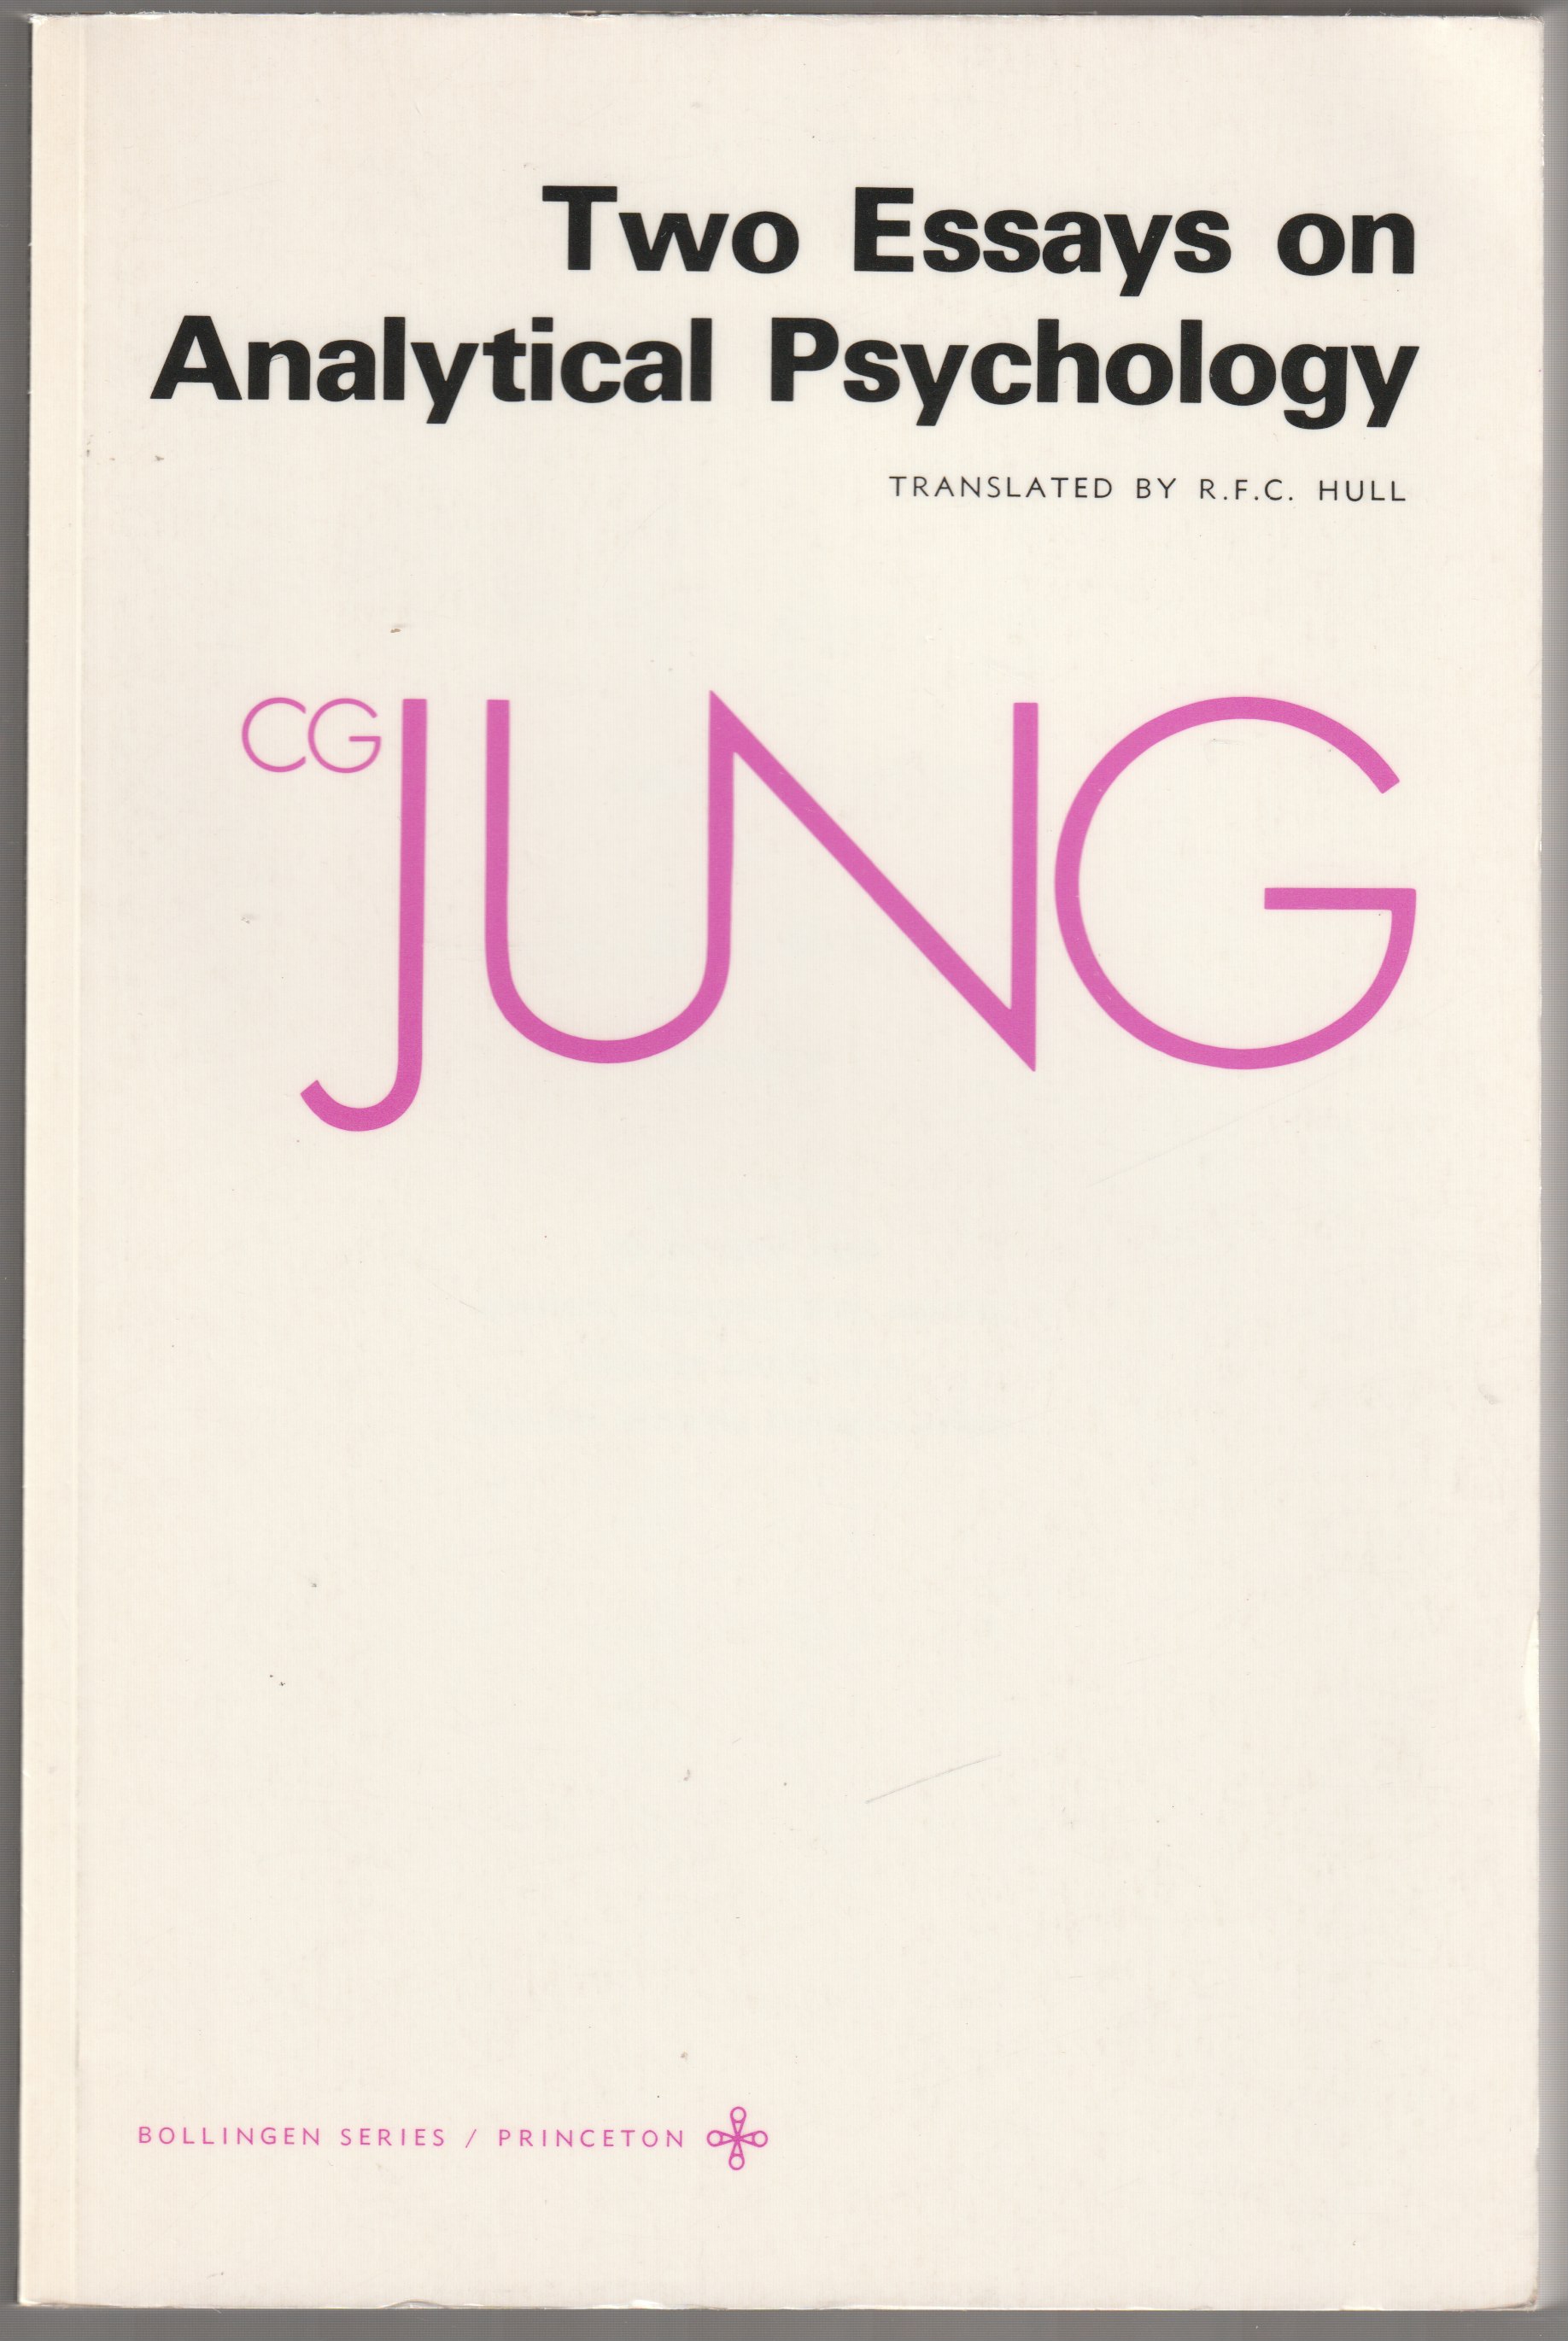 Two essays on analytical psychology